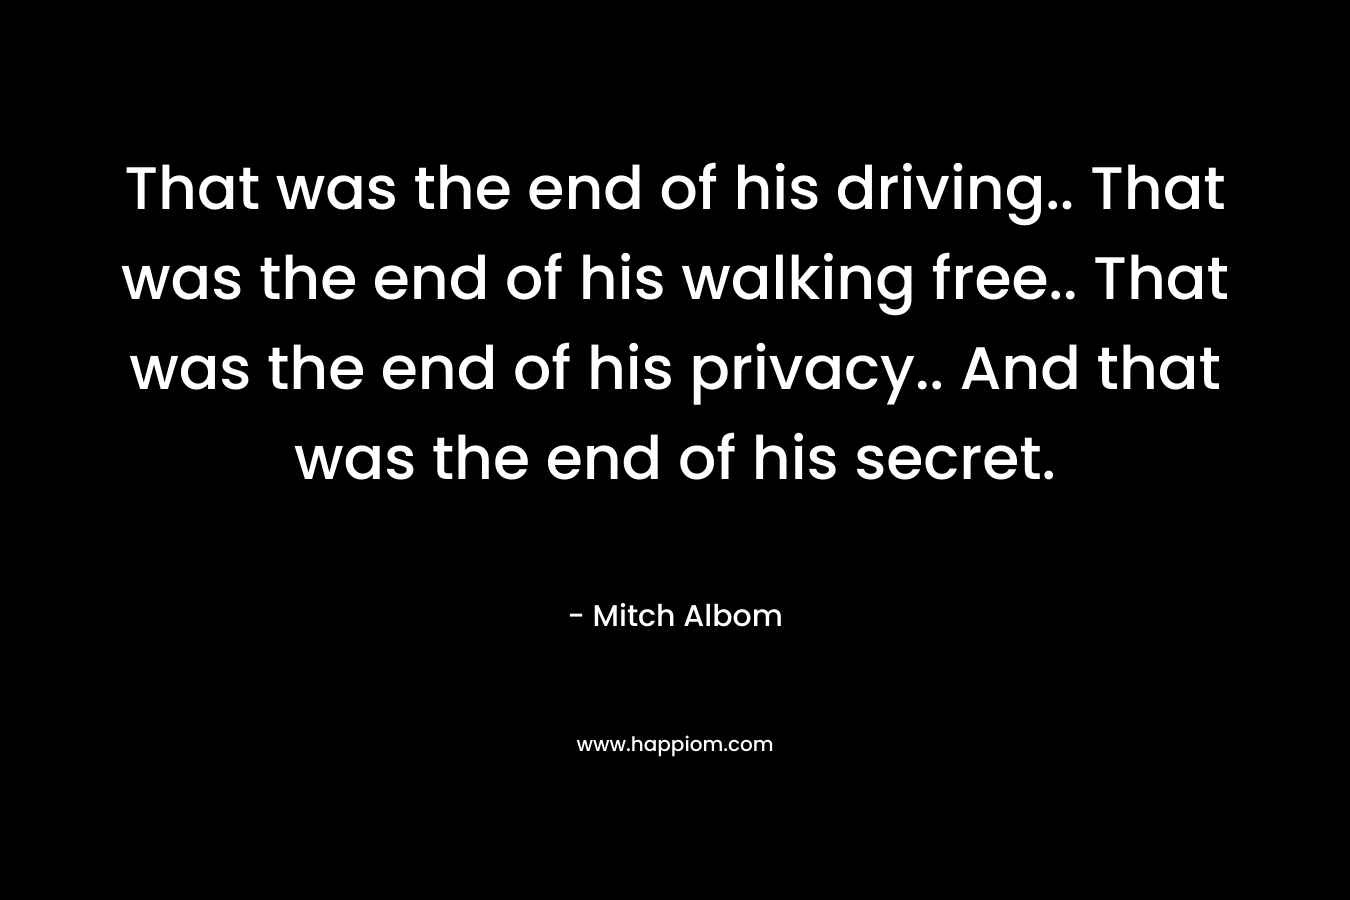 That was the end of his driving.. That was the end of his walking free.. That was the end of his privacy.. And that was the end of his secret. – Mitch Albom